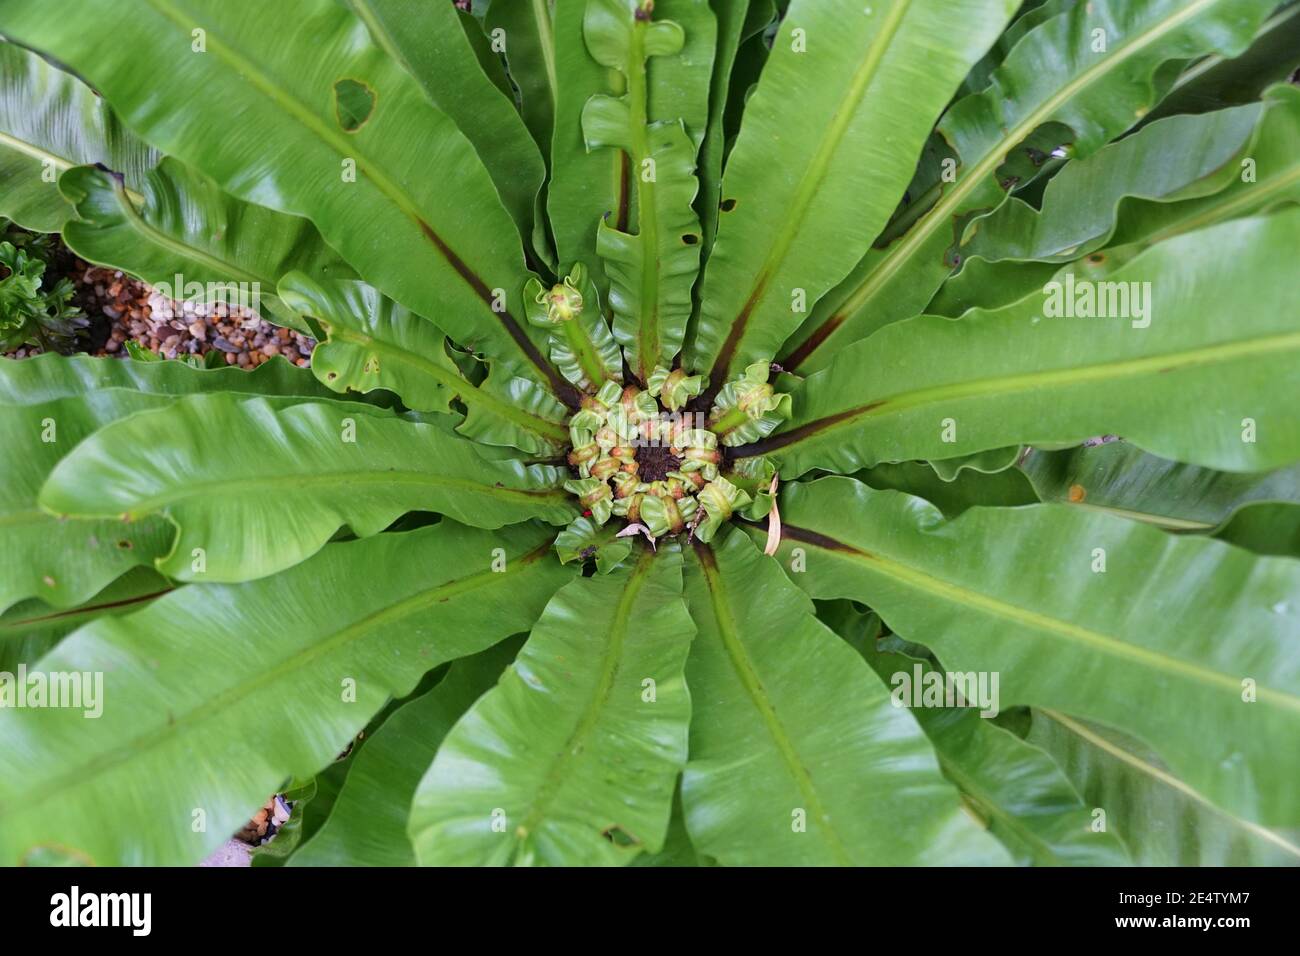 The center of the green foliage of Bird's-nest Fern Stock Photo